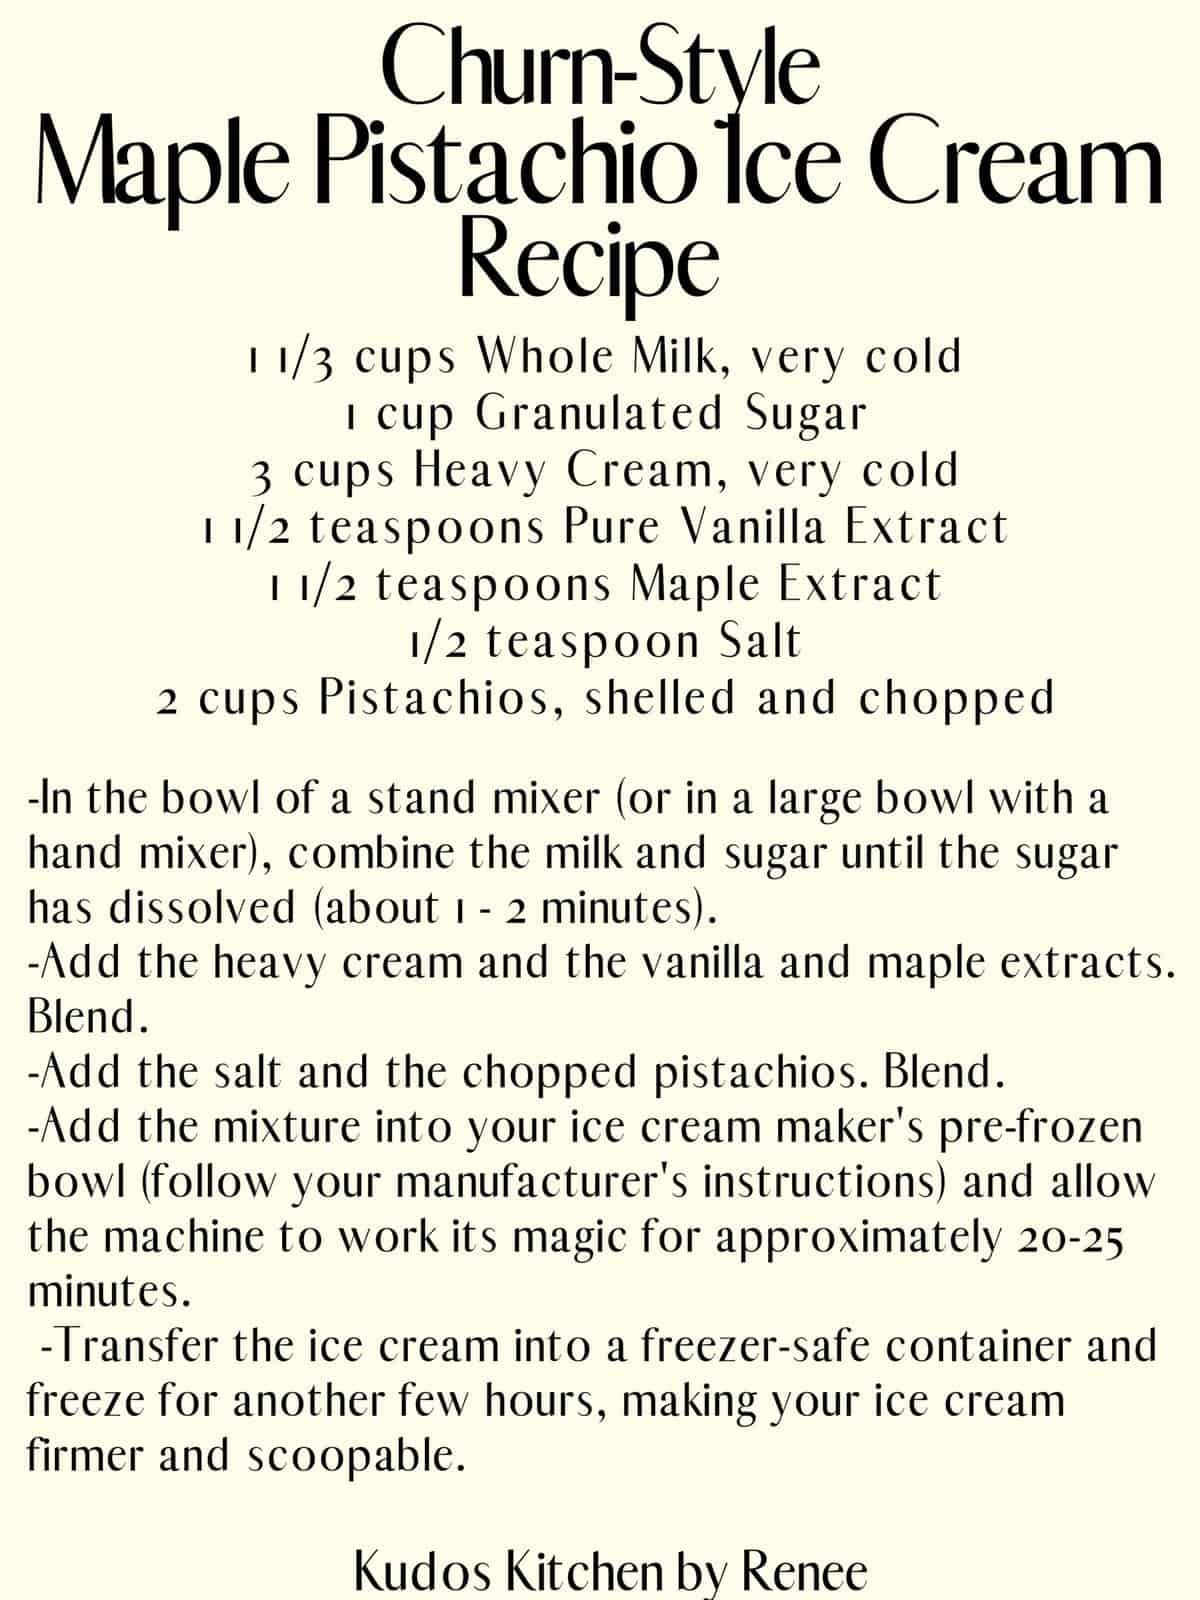 A recipe for Maple Pistachio Ice Cream - churn style - with the ingredients and instructions.